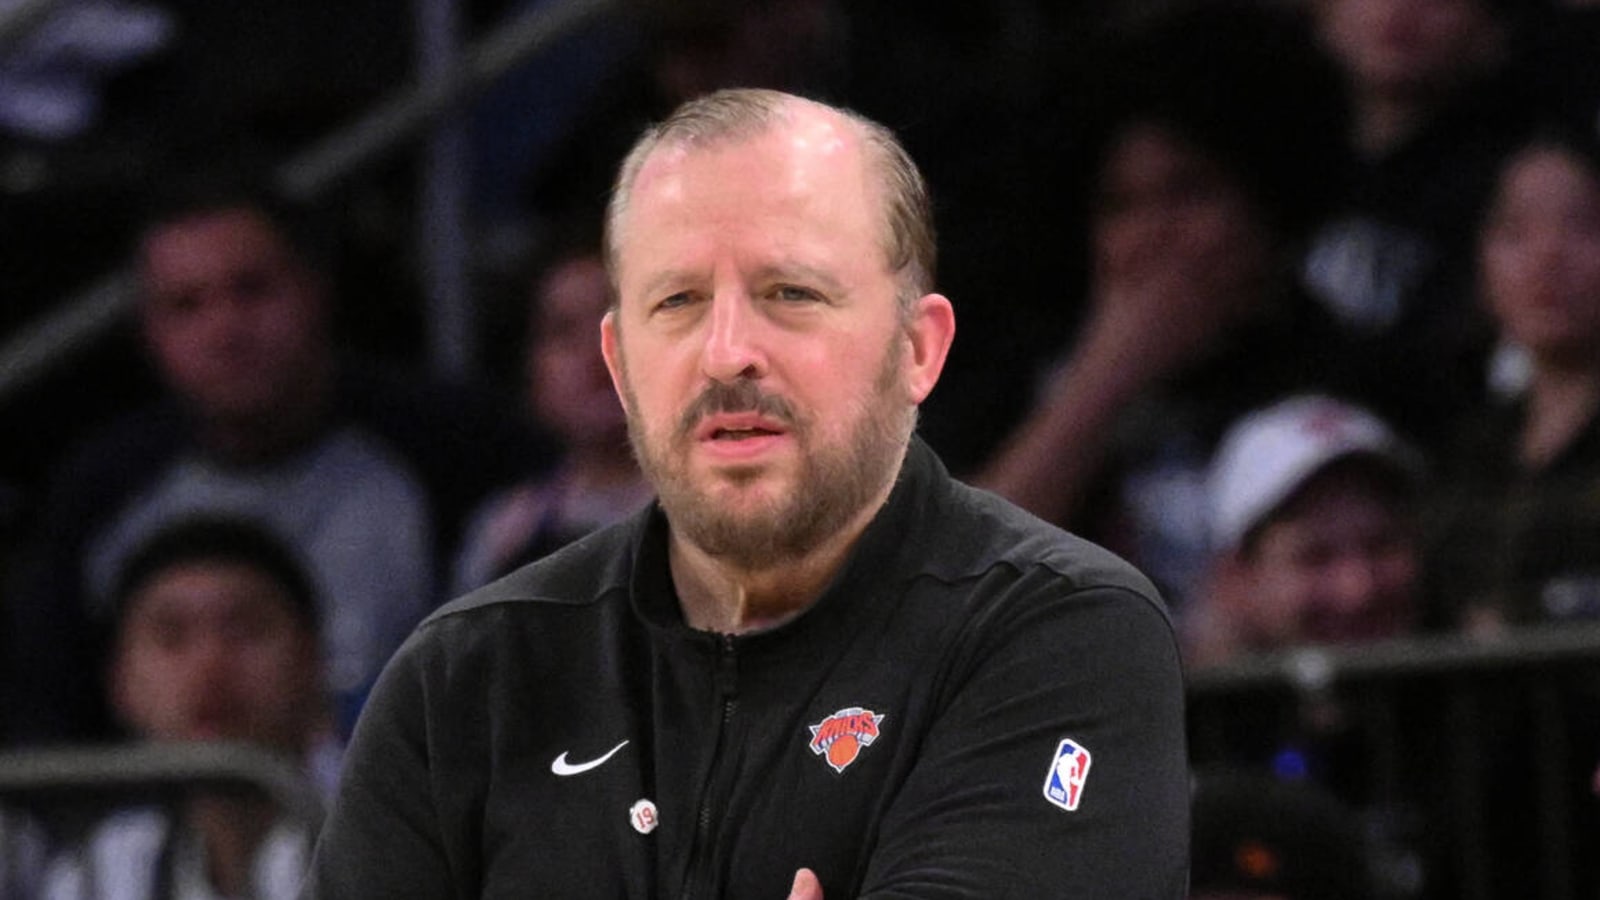 Tom Thibodeau has three-word message for NBA after Knicks’ loss